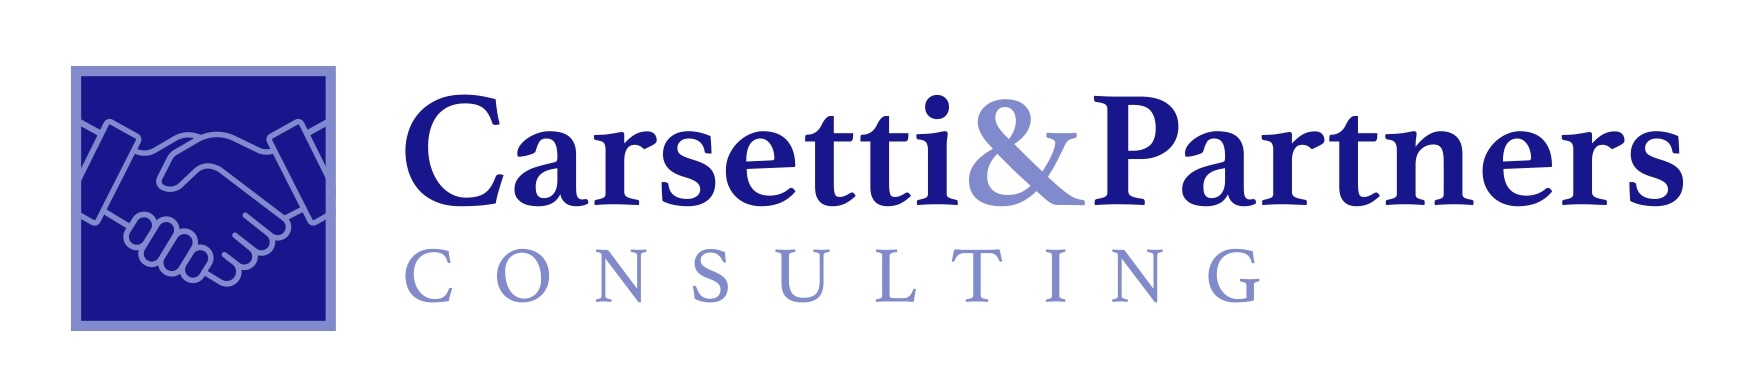 Logo Carsetti & Partners Consulting